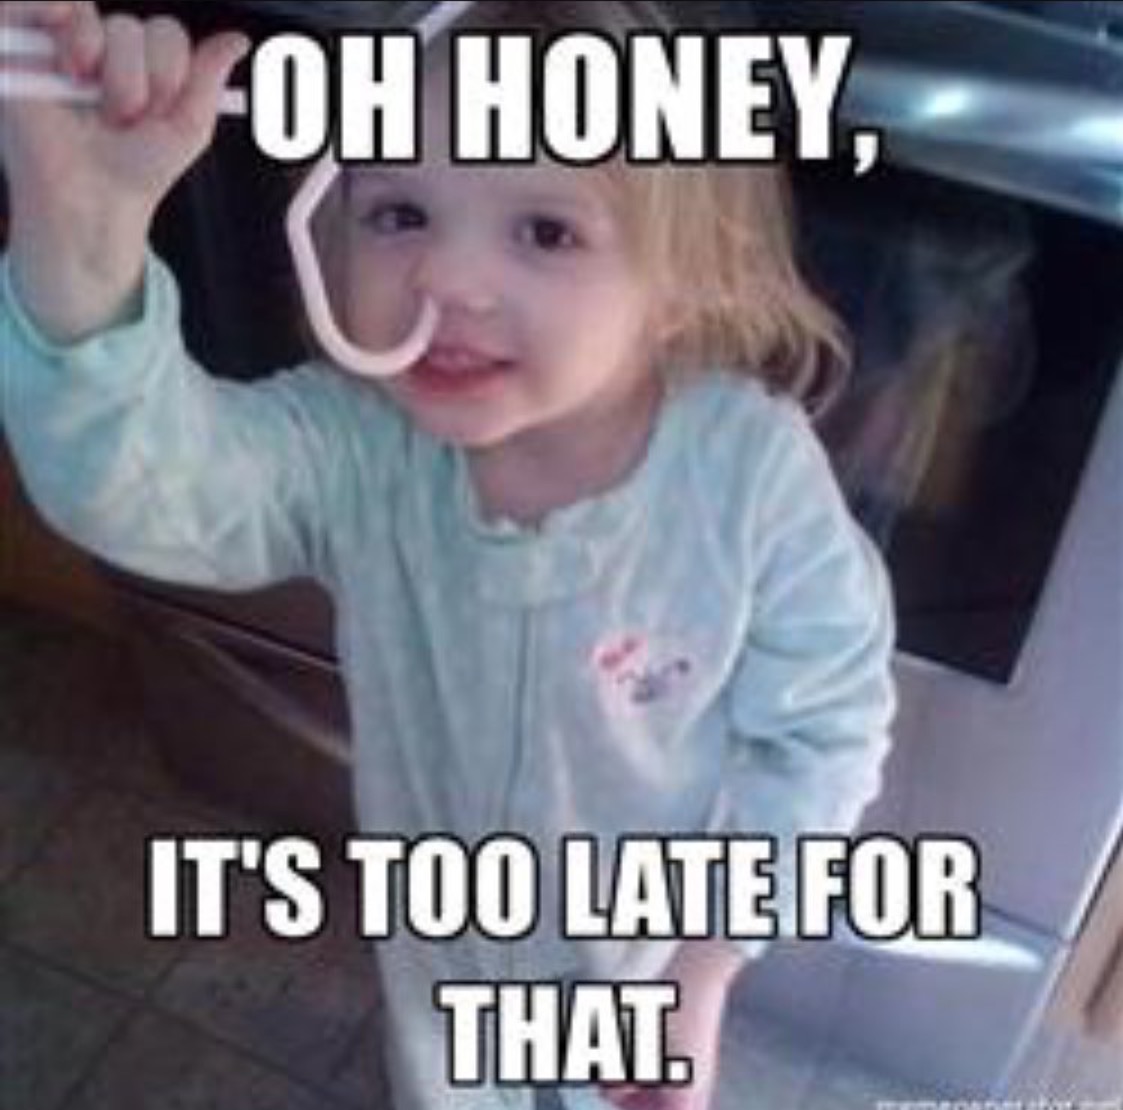 funny picture - coat hanger kid meme - Oh Honey, It'S Too Late For That.